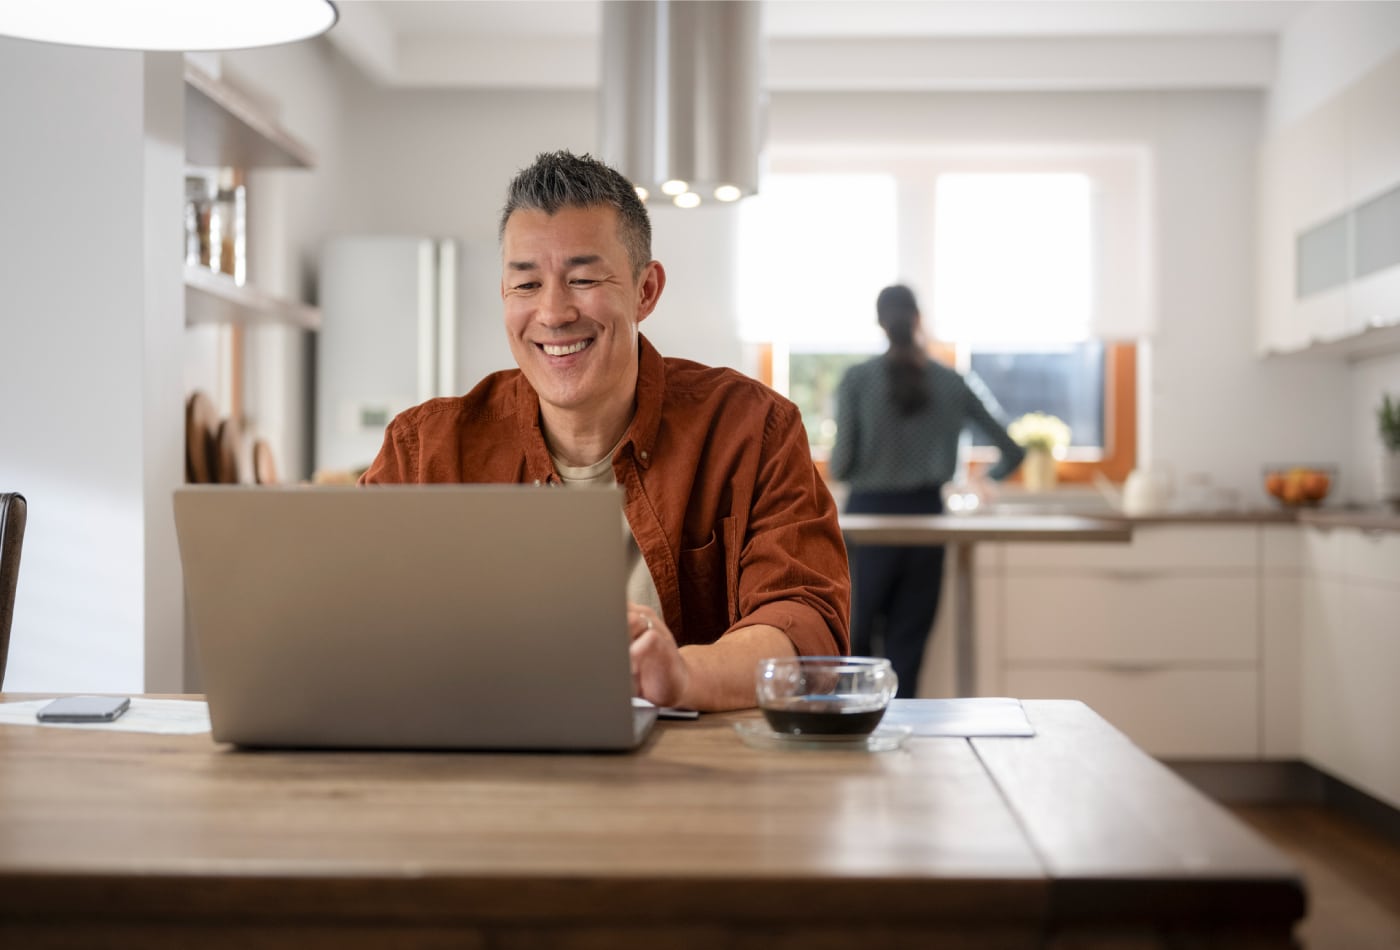 Man sits at kitchen table working on laptop and smiling.